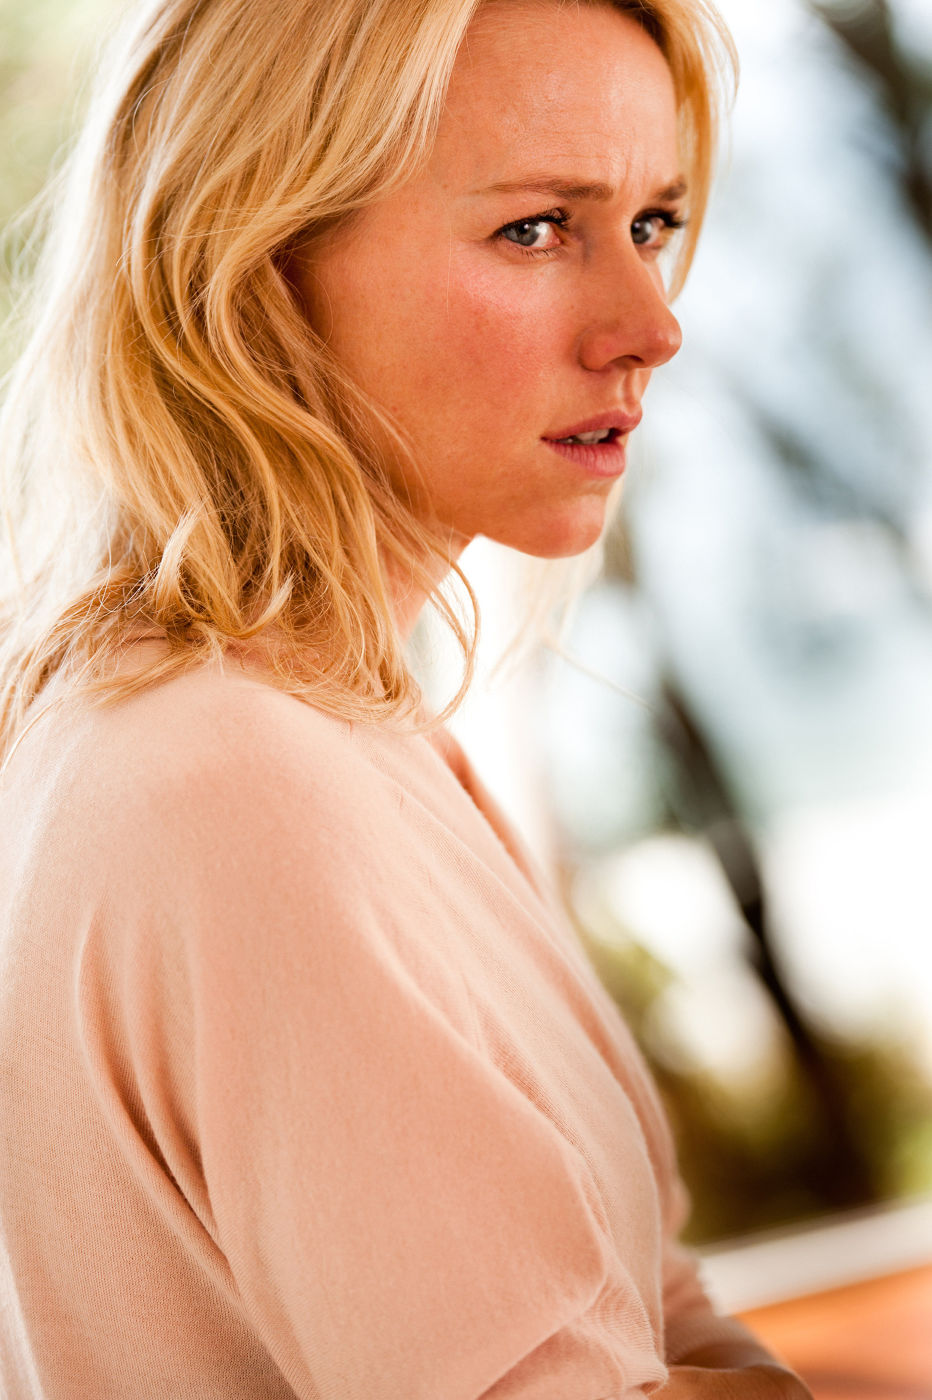 Naomi Watts stars as Lil in Exclusive Releasing's Adore (2013)